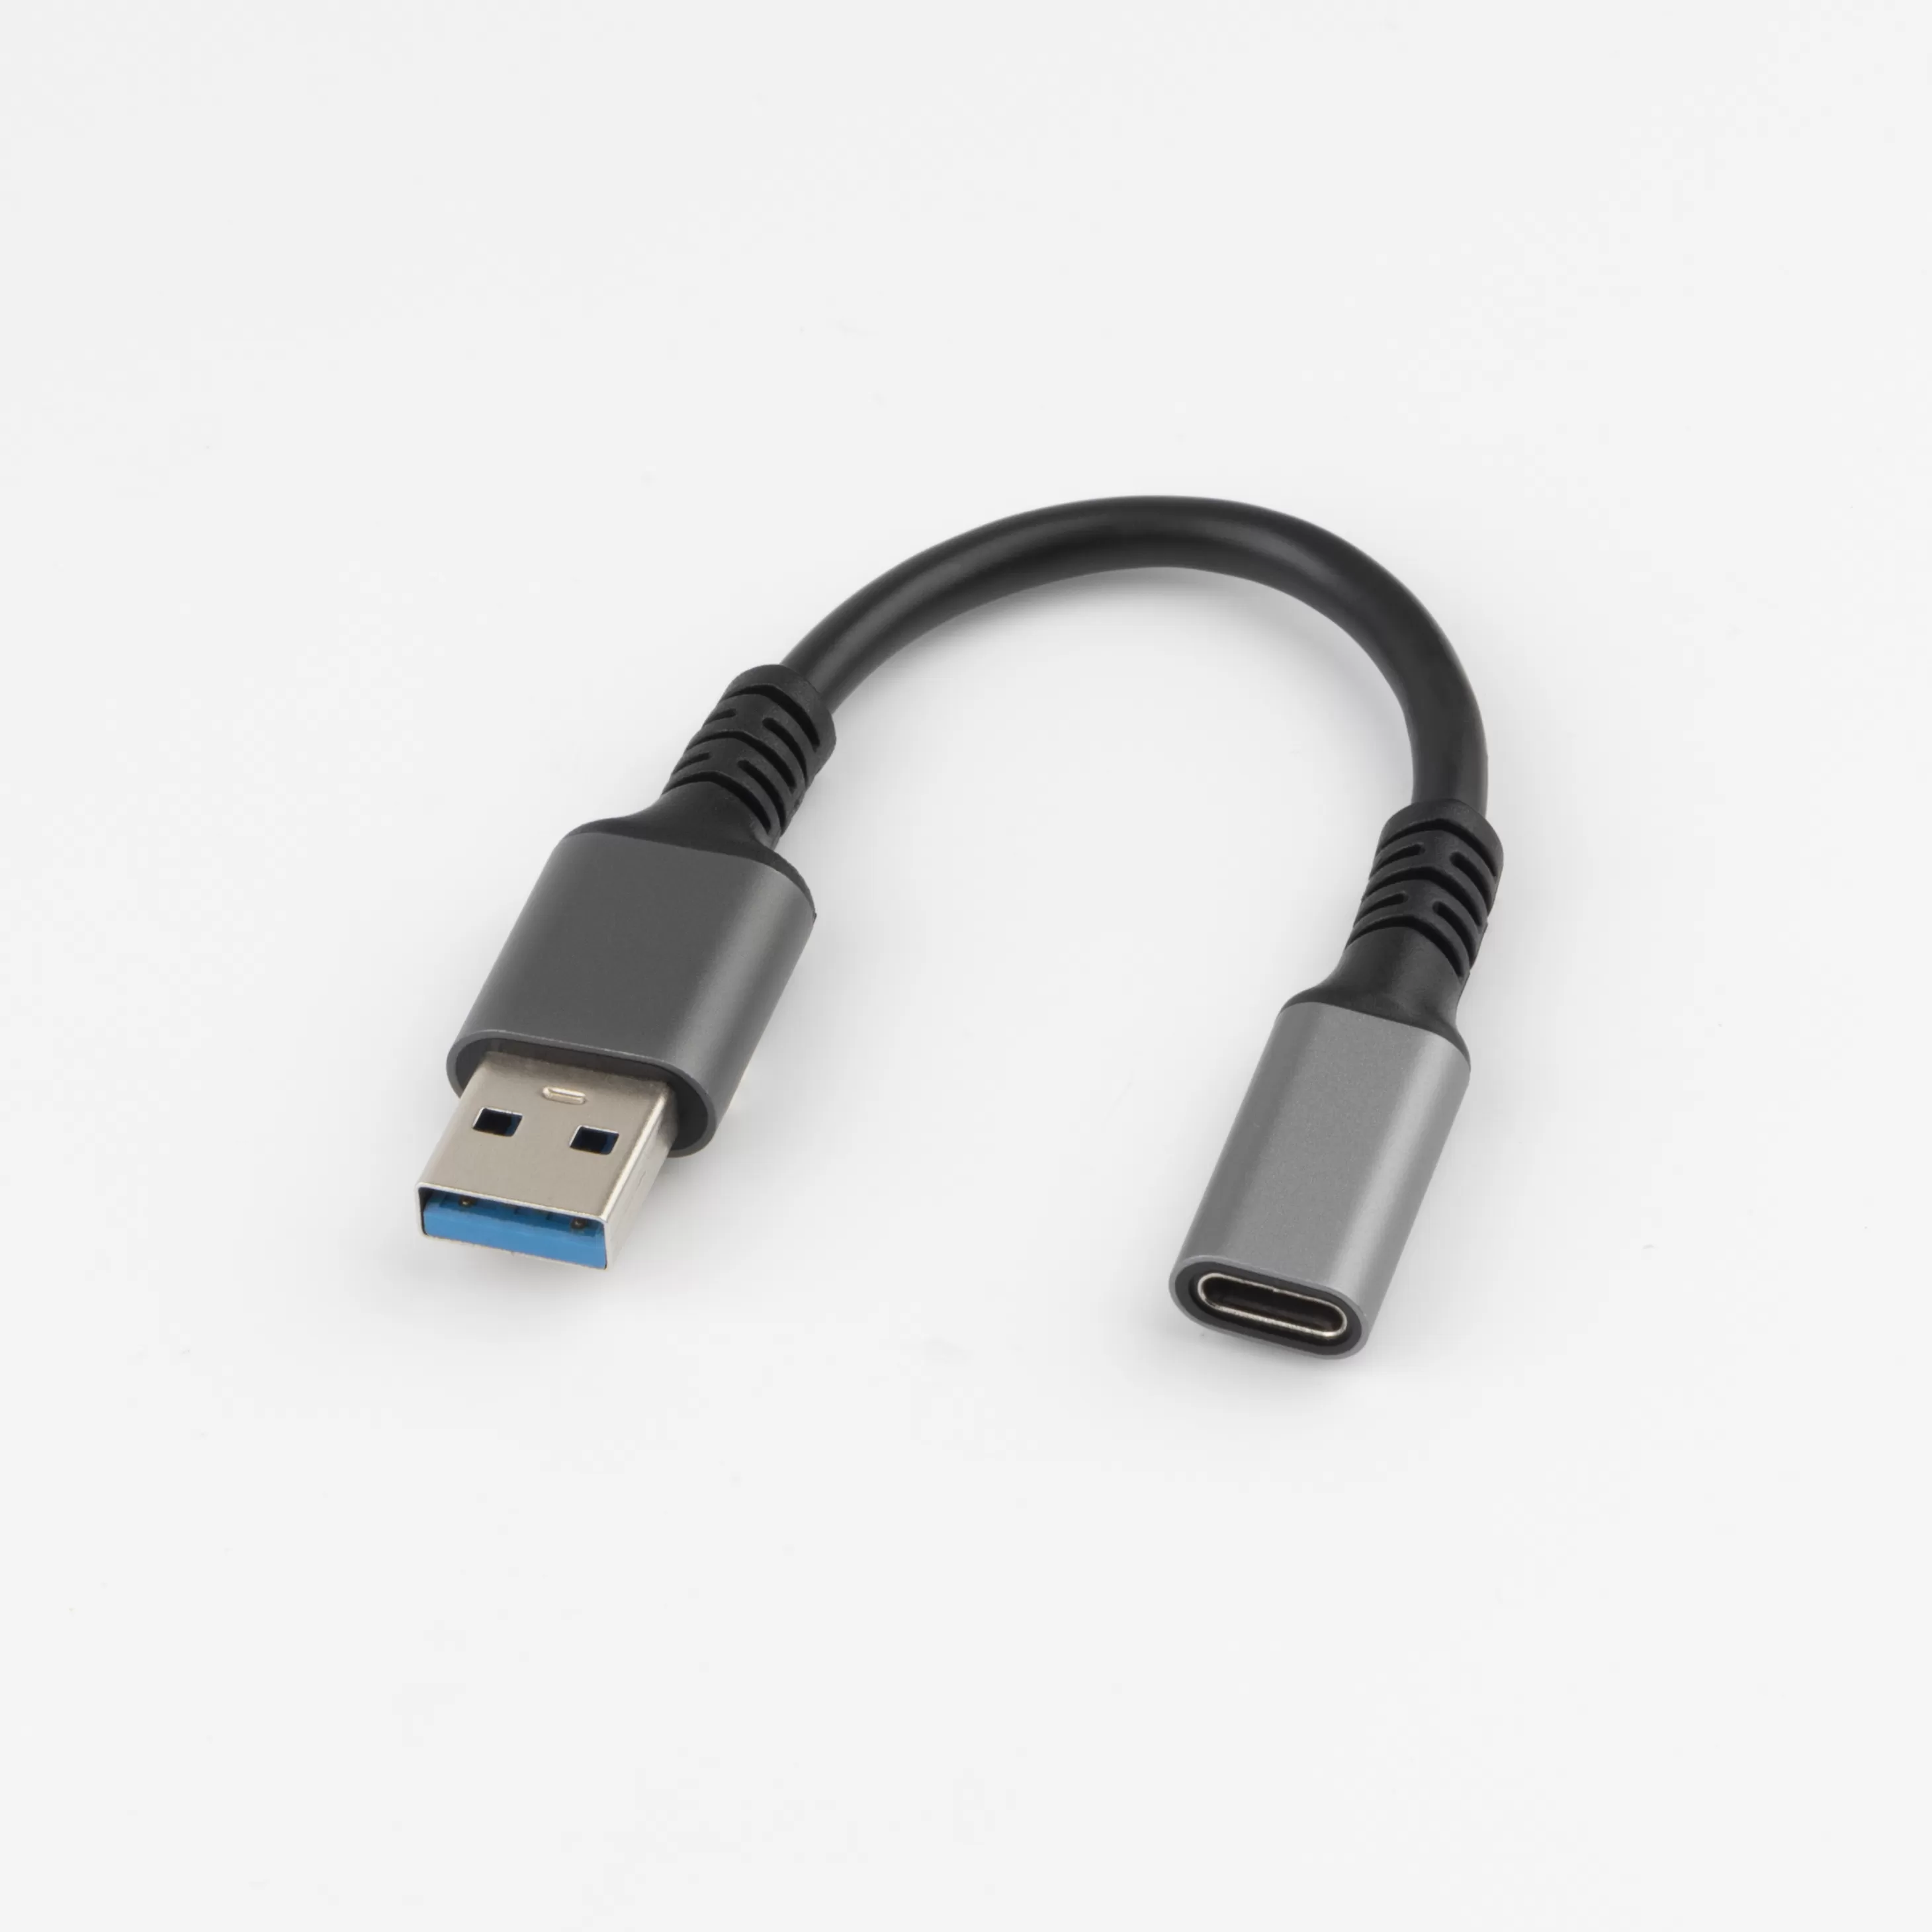 USB3.1 Gen2 usb c female to usb a cable